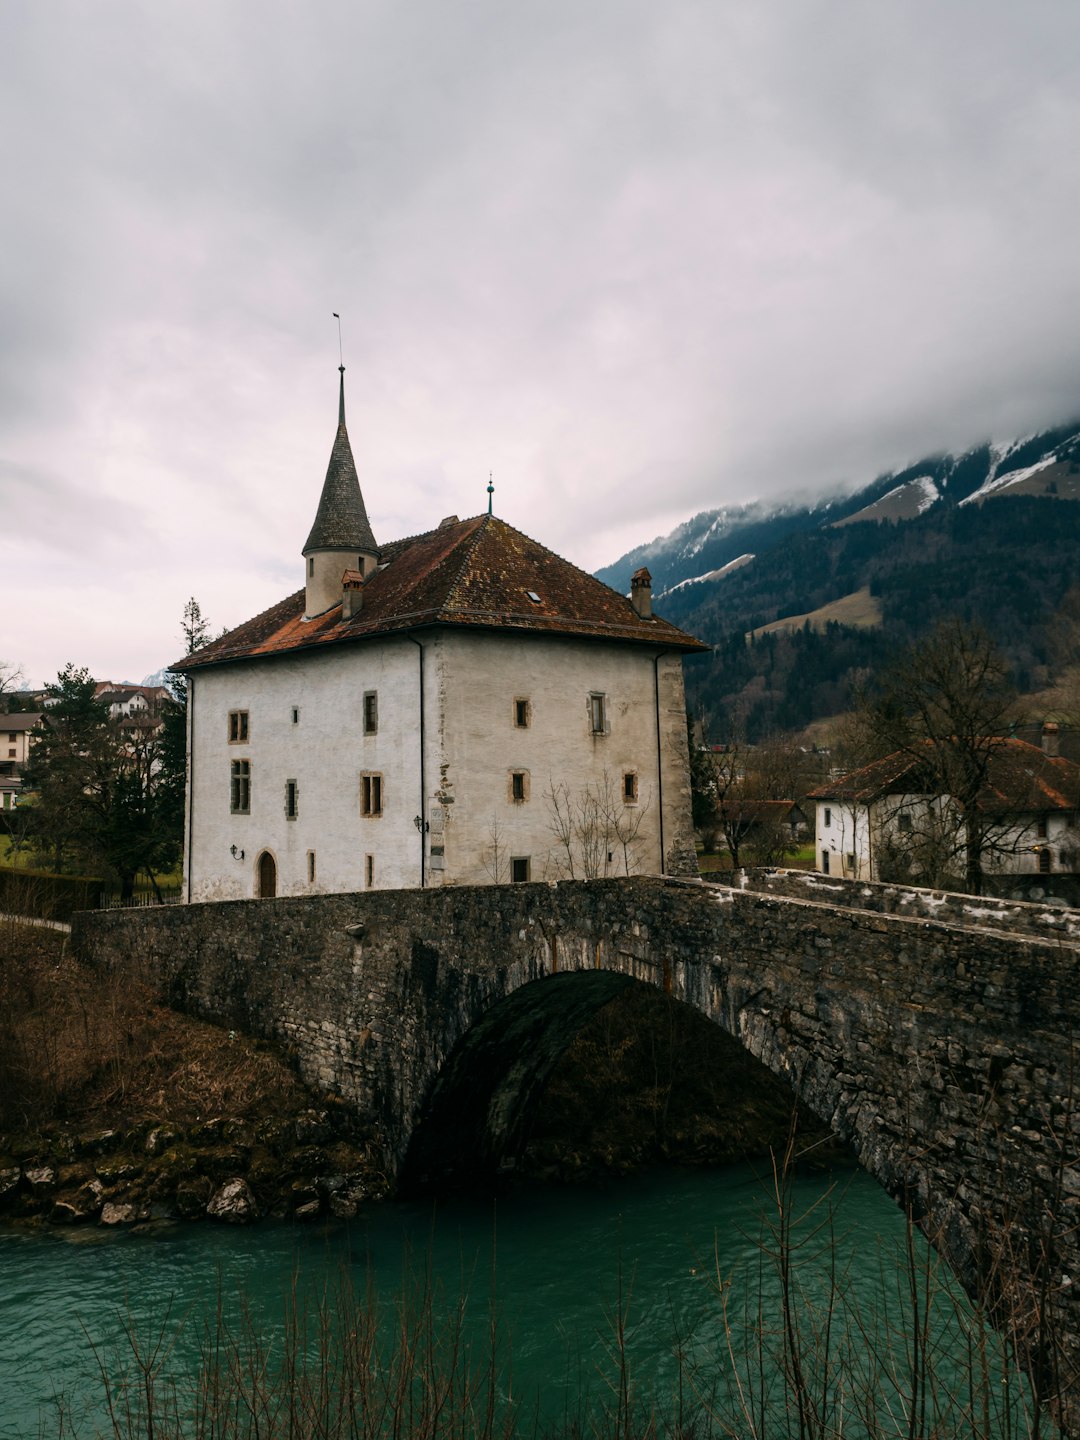 Travel Tips and Stories of Broc in Switzerland